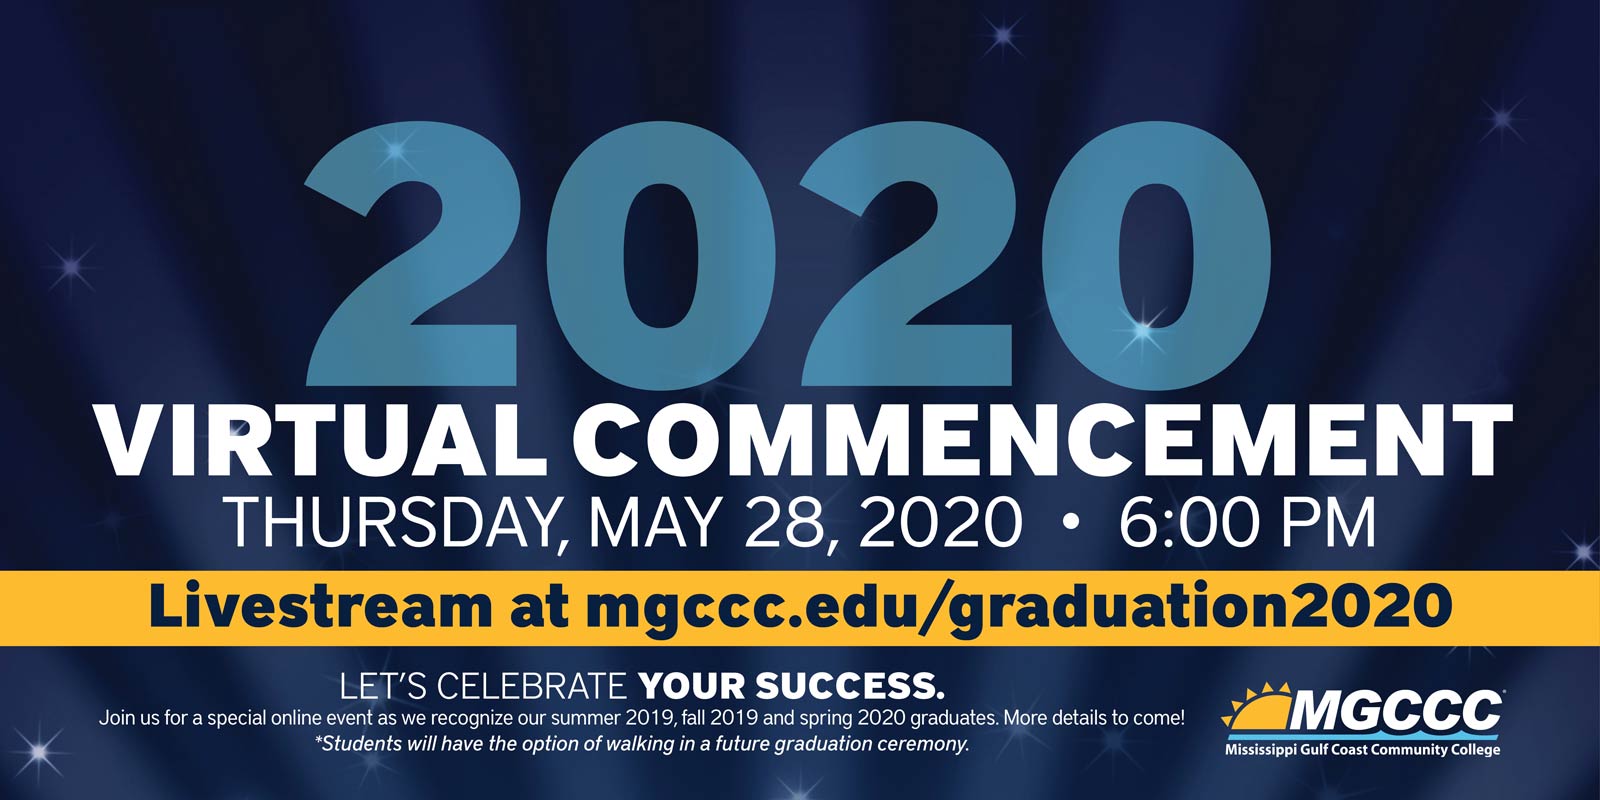 2020 Virtual Commencement Mississippi Gulf Coast Community College